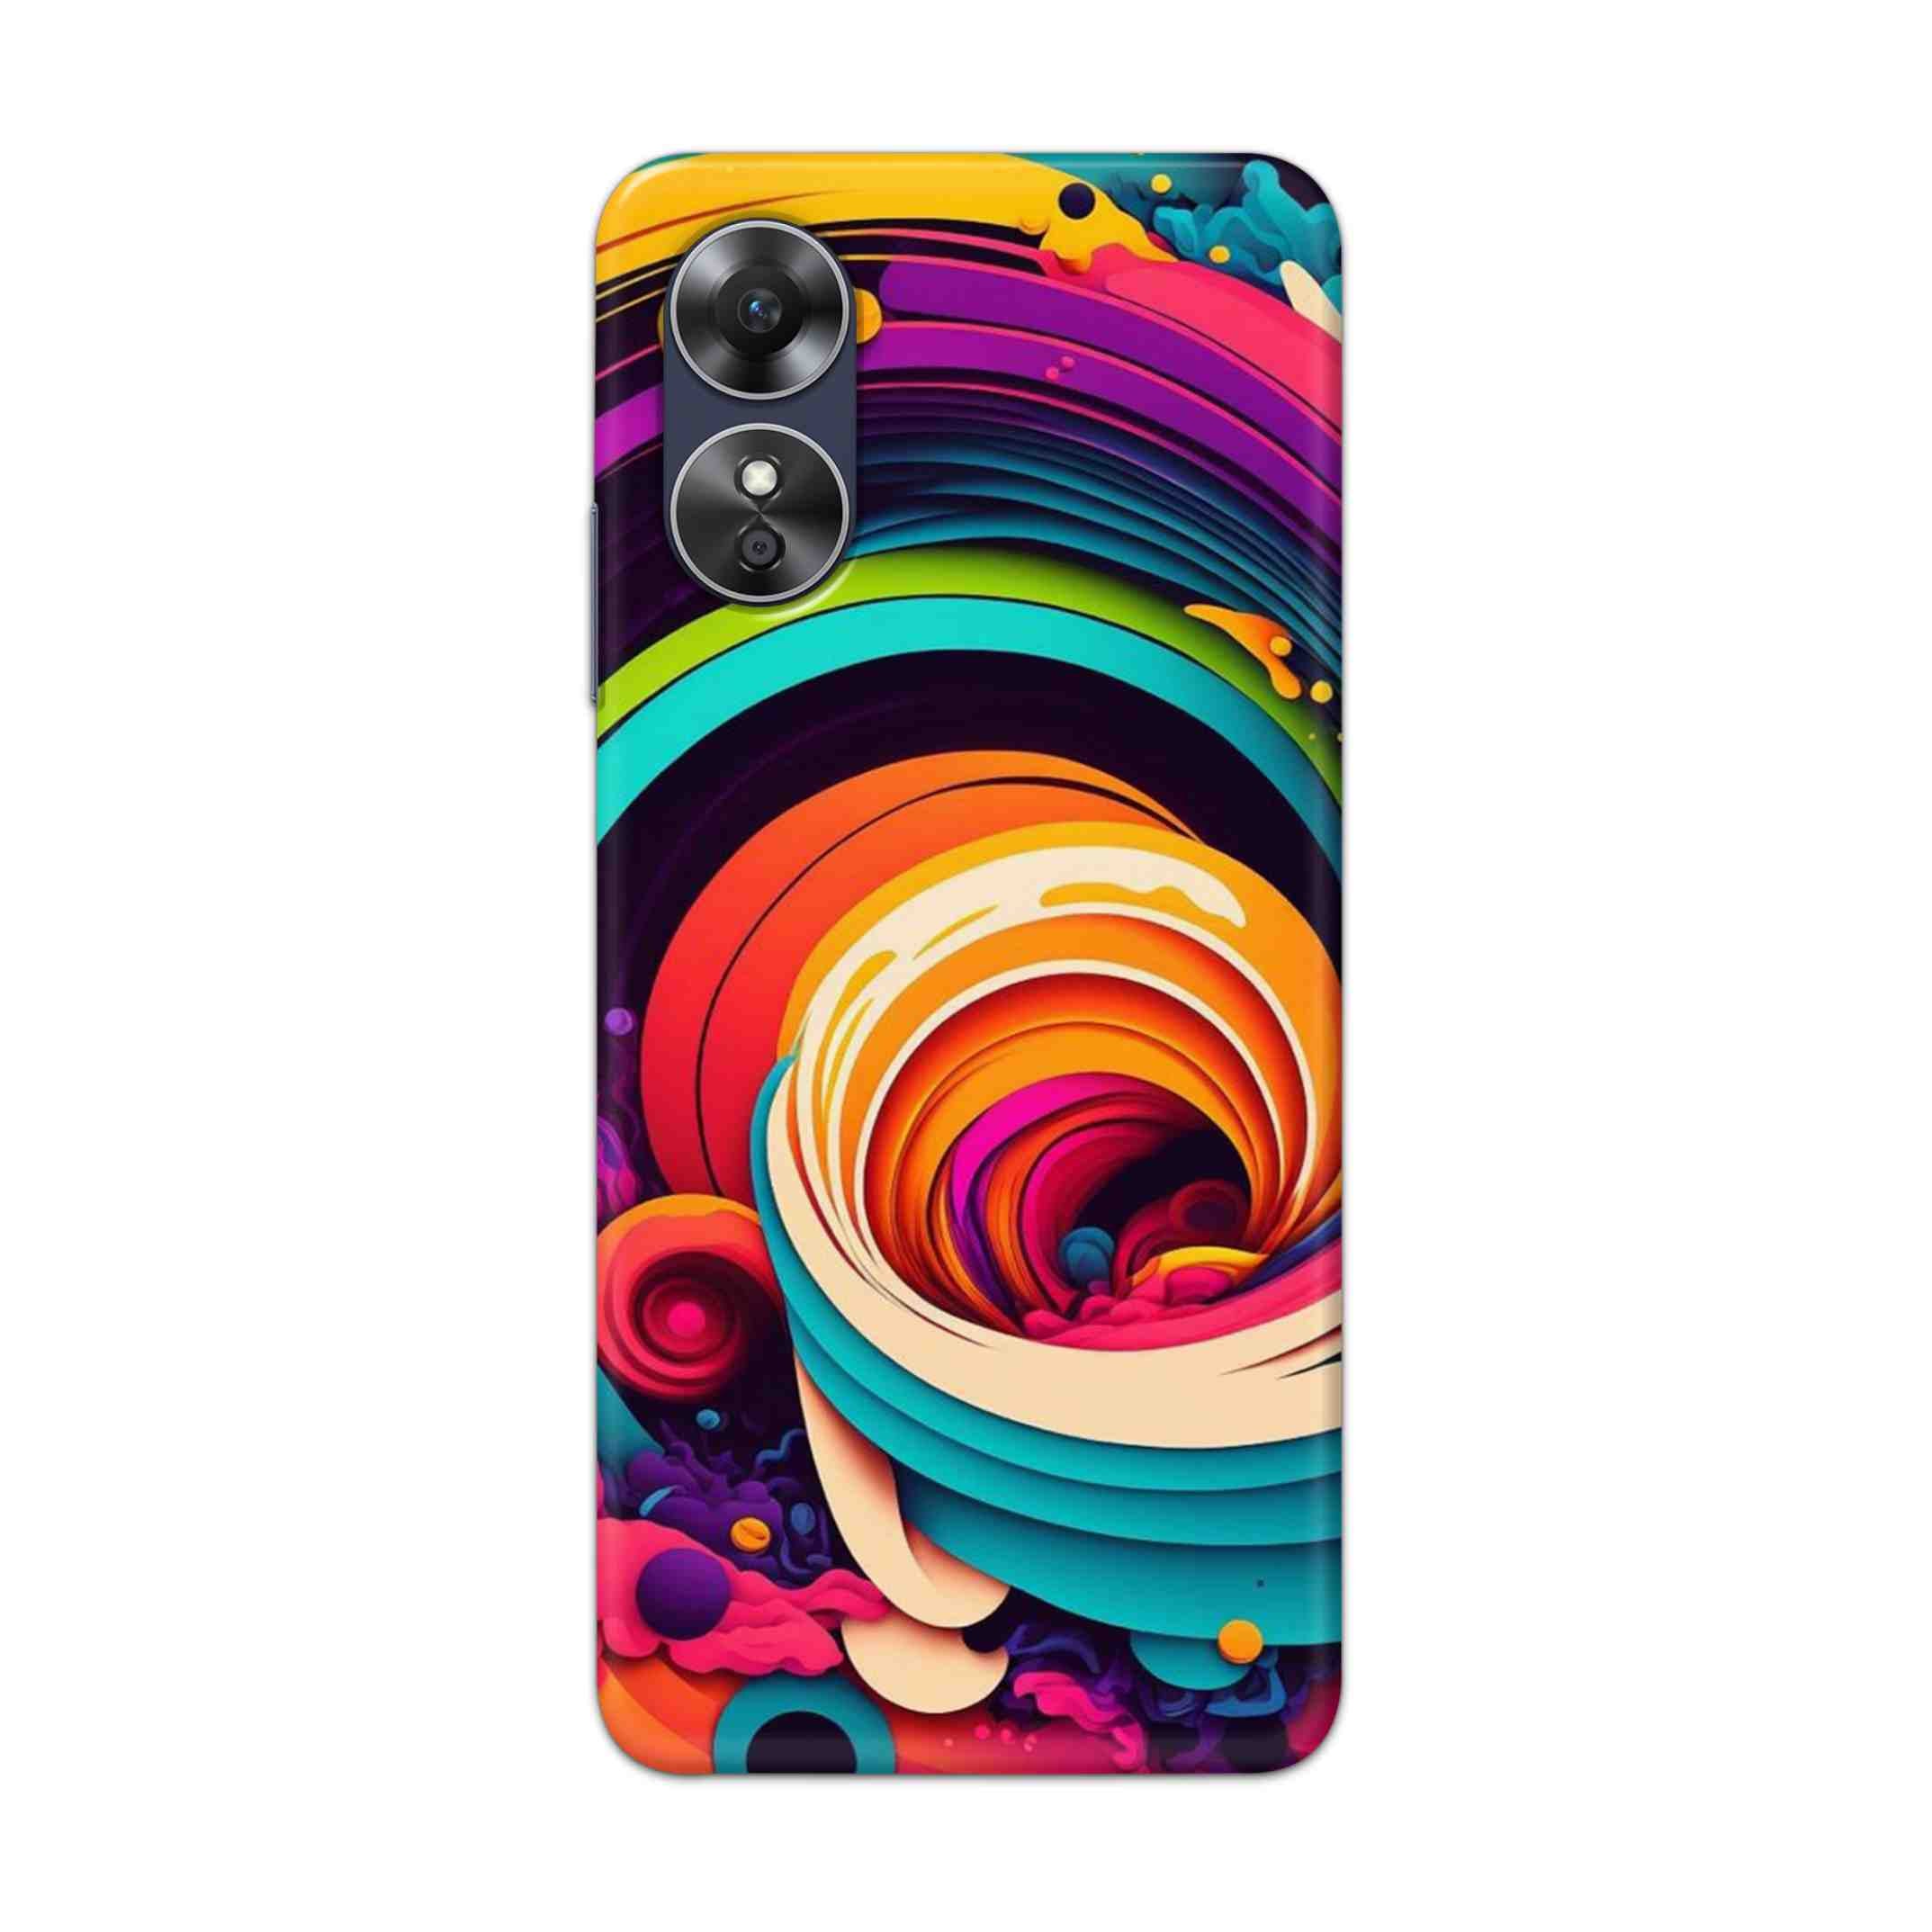 Buy Colour Circle Hard Back Mobile Phone Case Cover For Oppo A17 Online